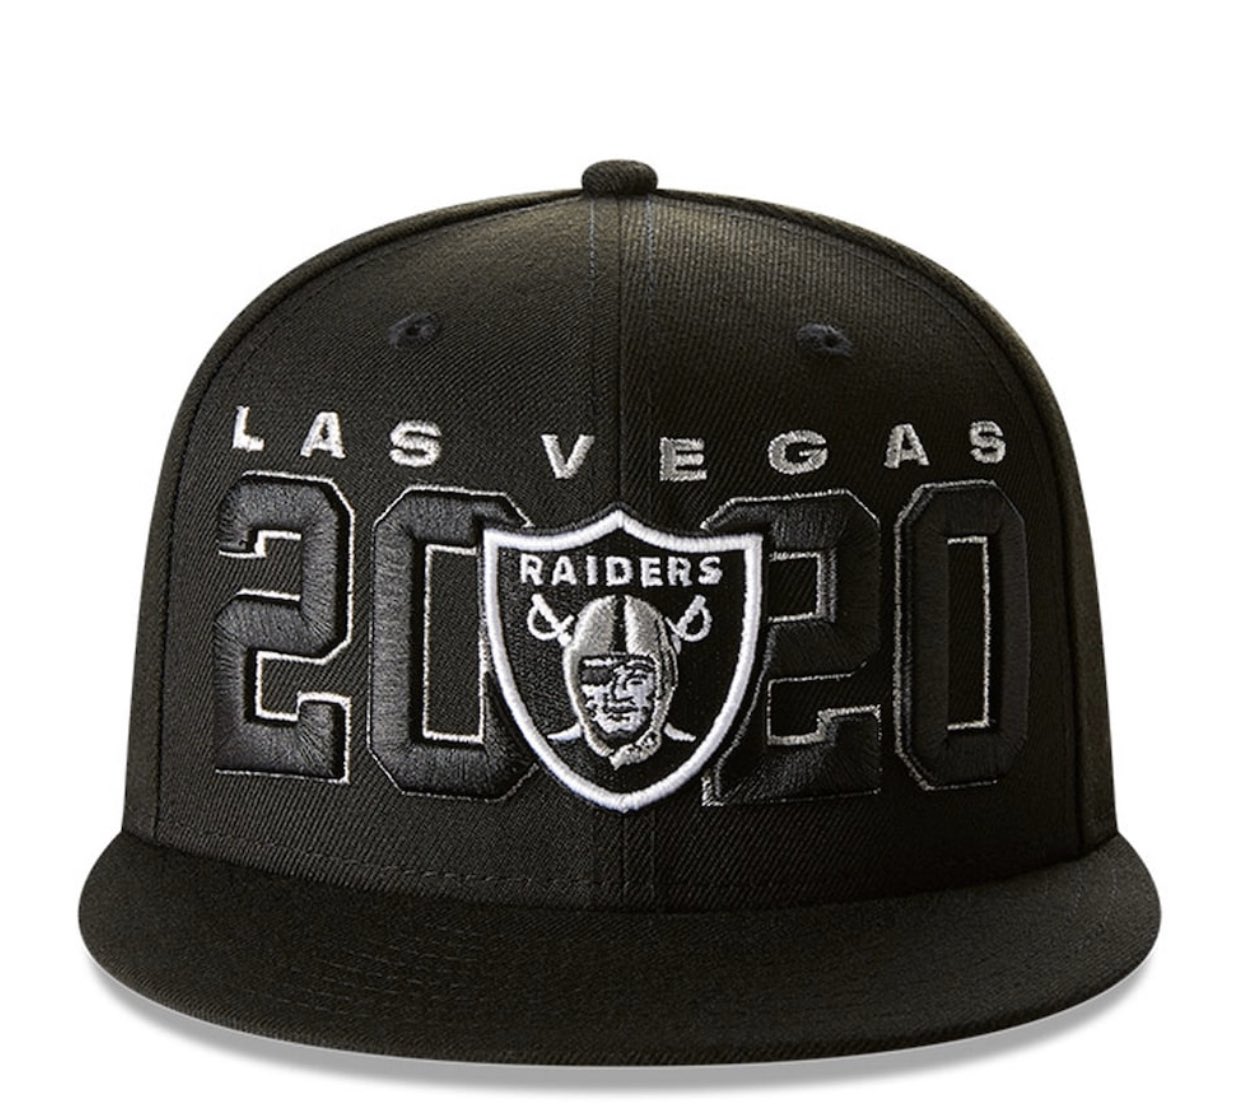 Mick Akers on X: The Las Vegas @Raiders 2020 NFL Draft hat now available  for sale on the NFL Shop. #vegas #raiders #NFLDraft   / X